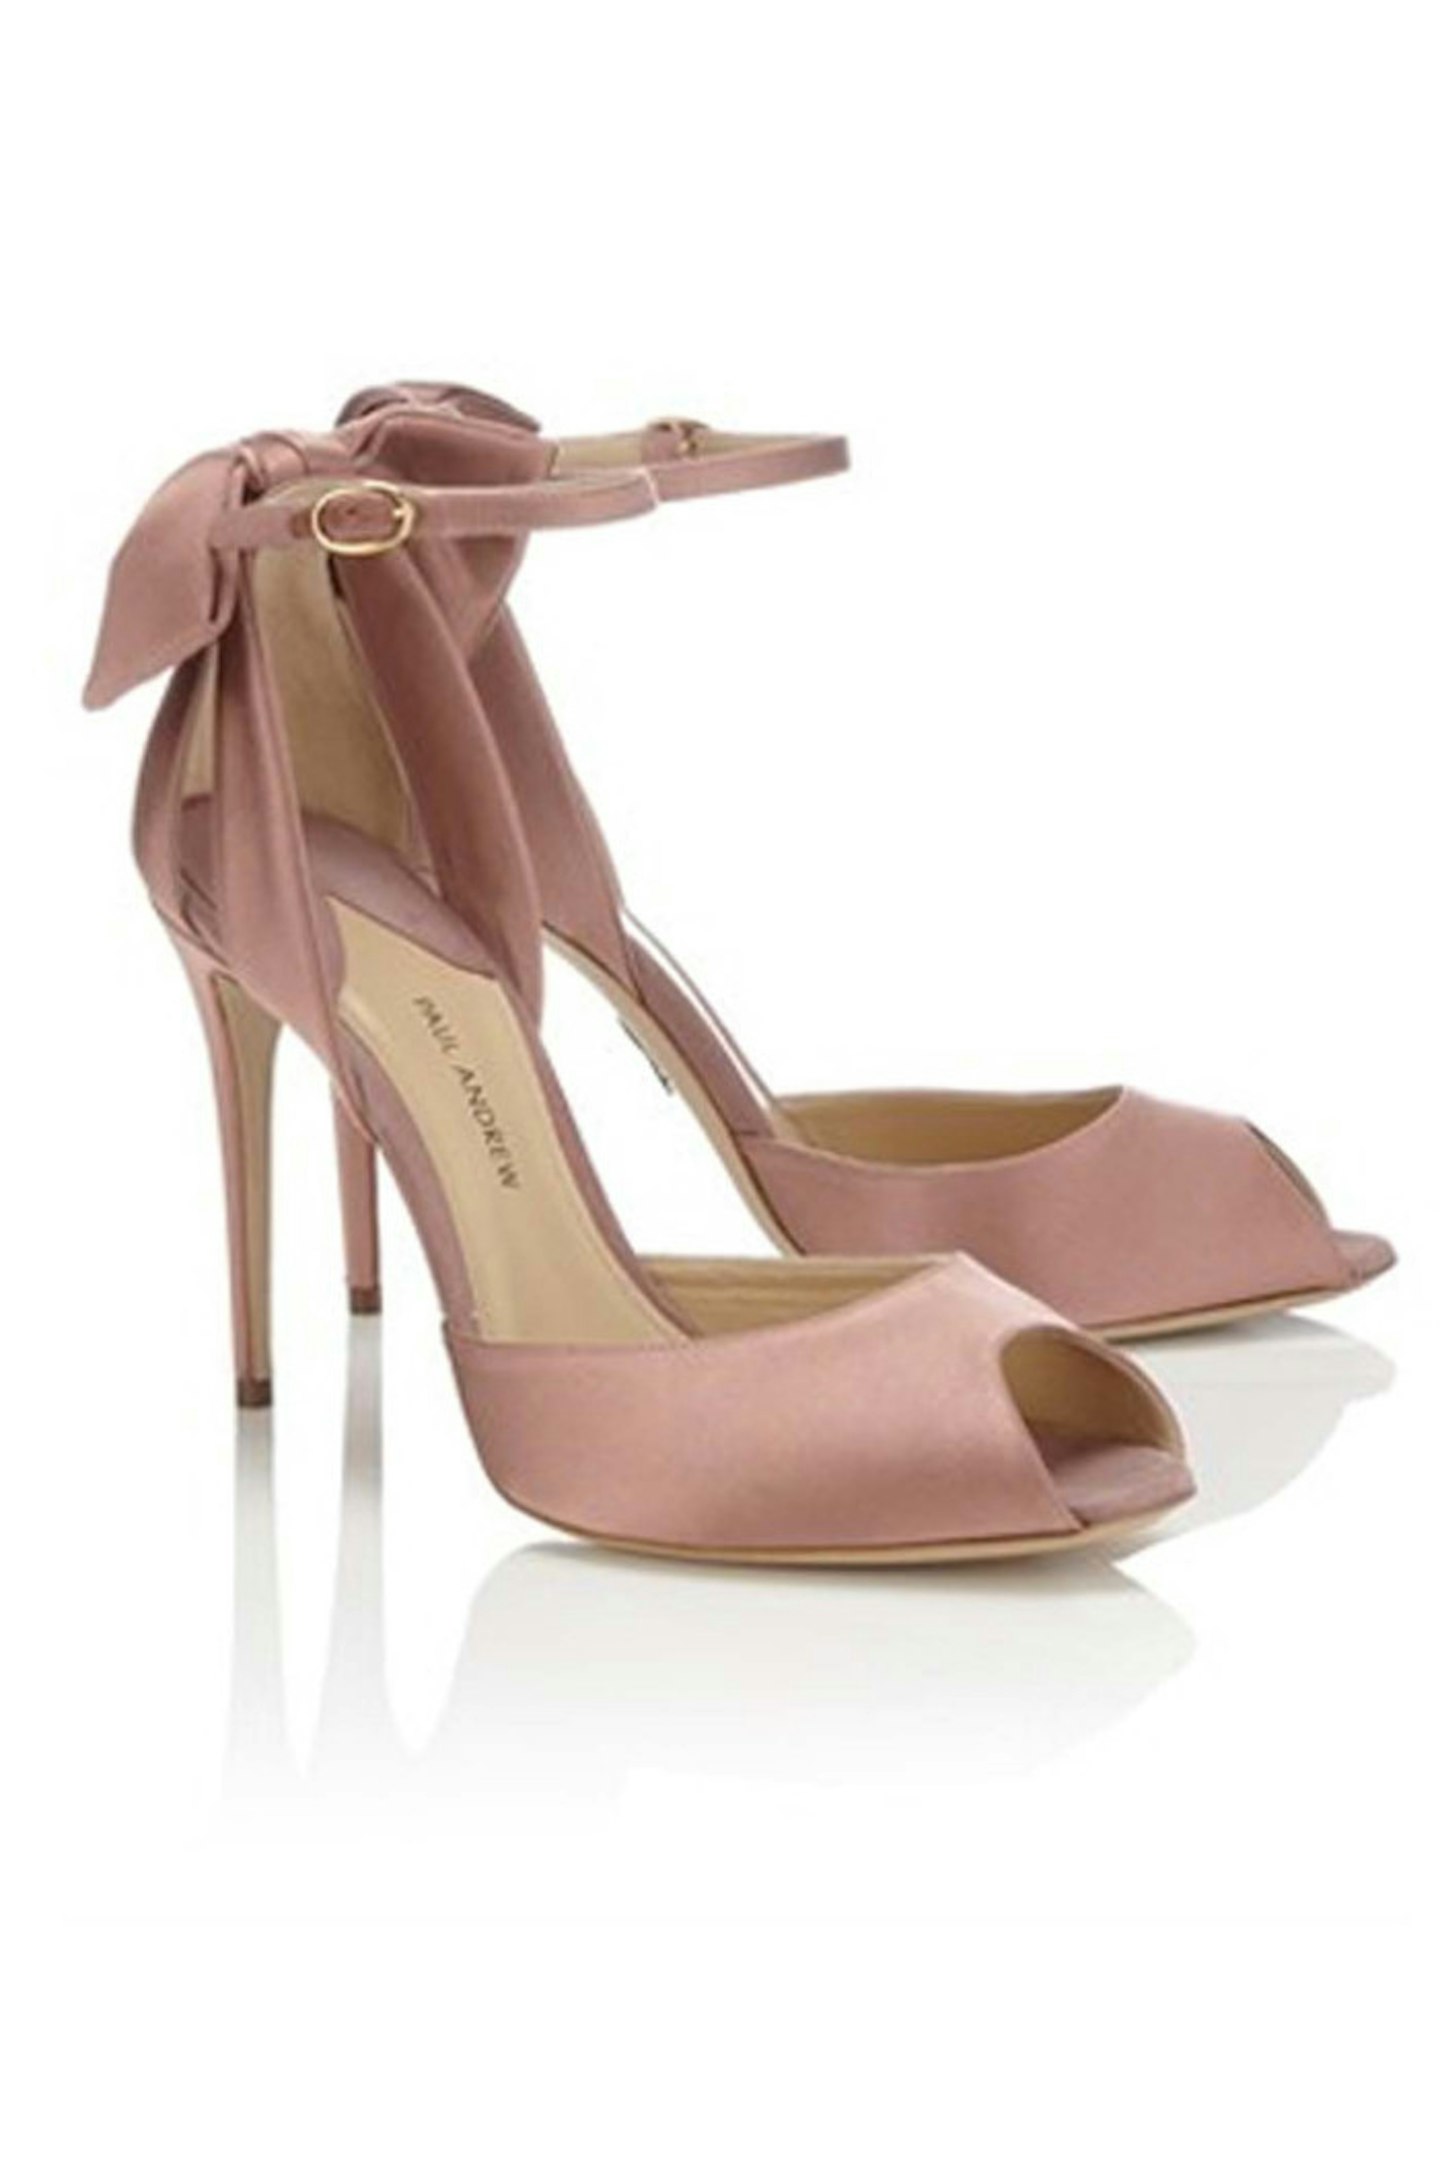 5. Pink heeled sandals, £595, Paul Andrew at Avenue 32